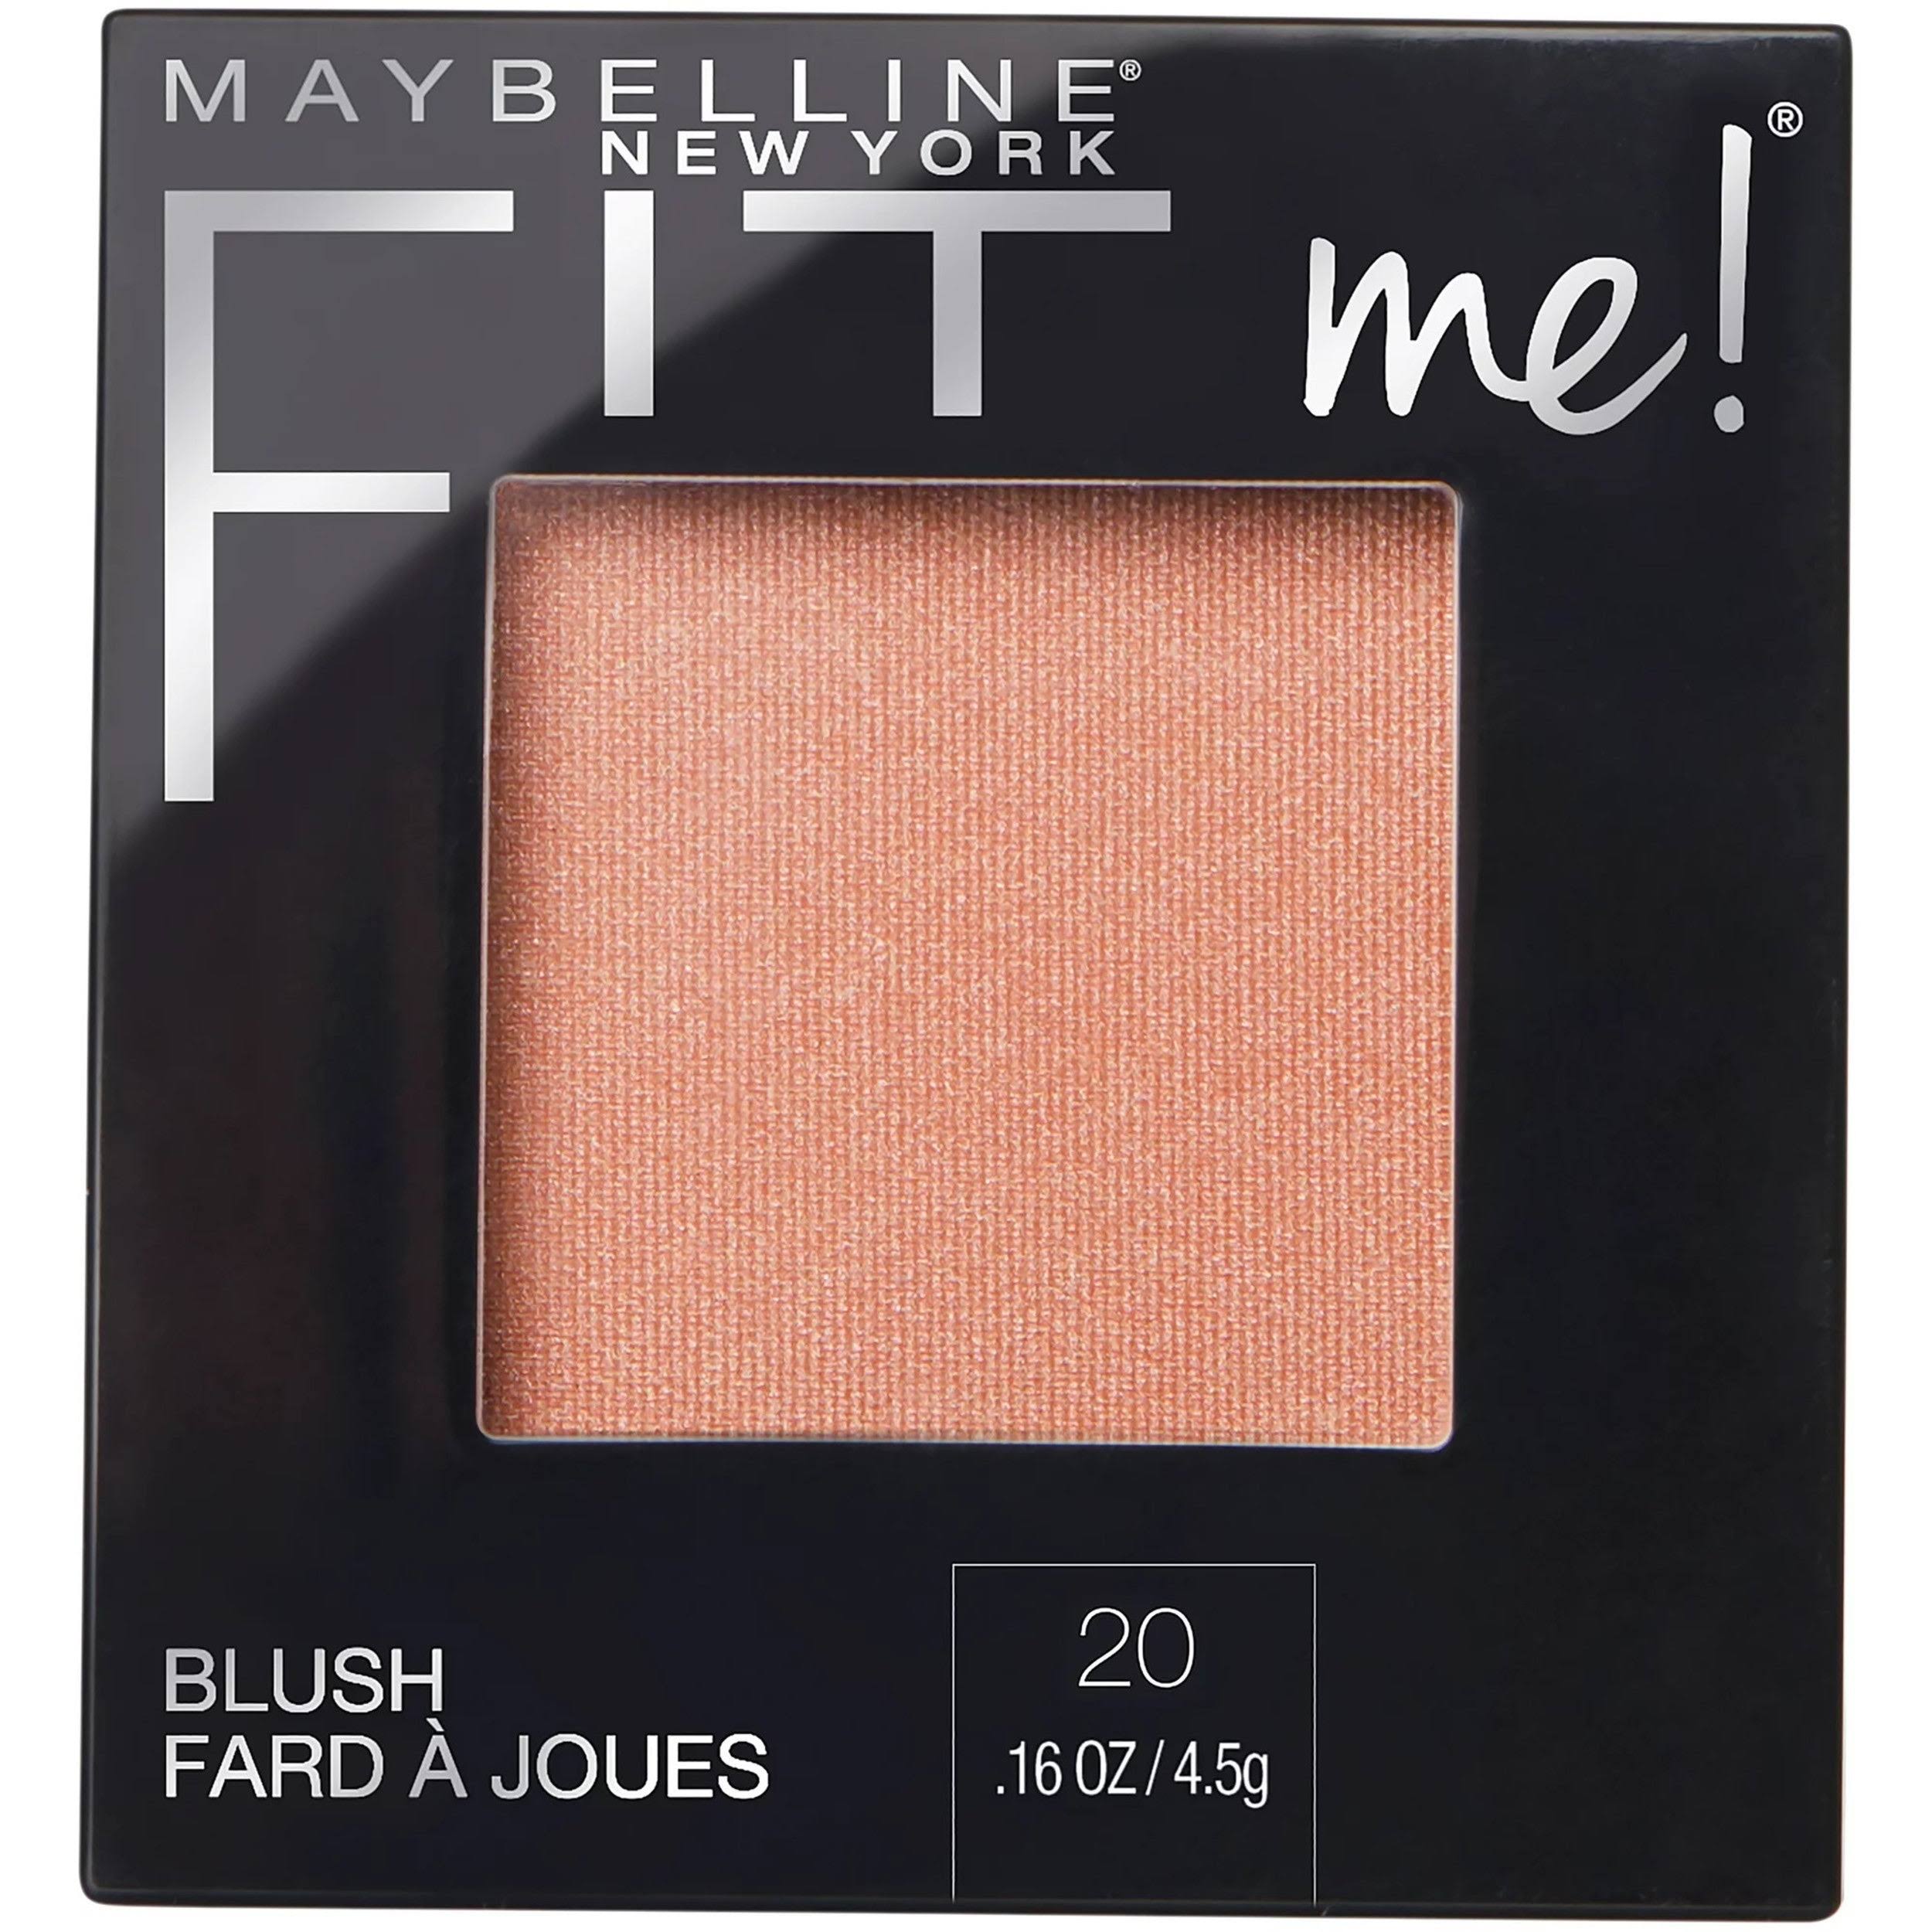 Maybelline Fit Me Blush - 55 Berry, 4.5g